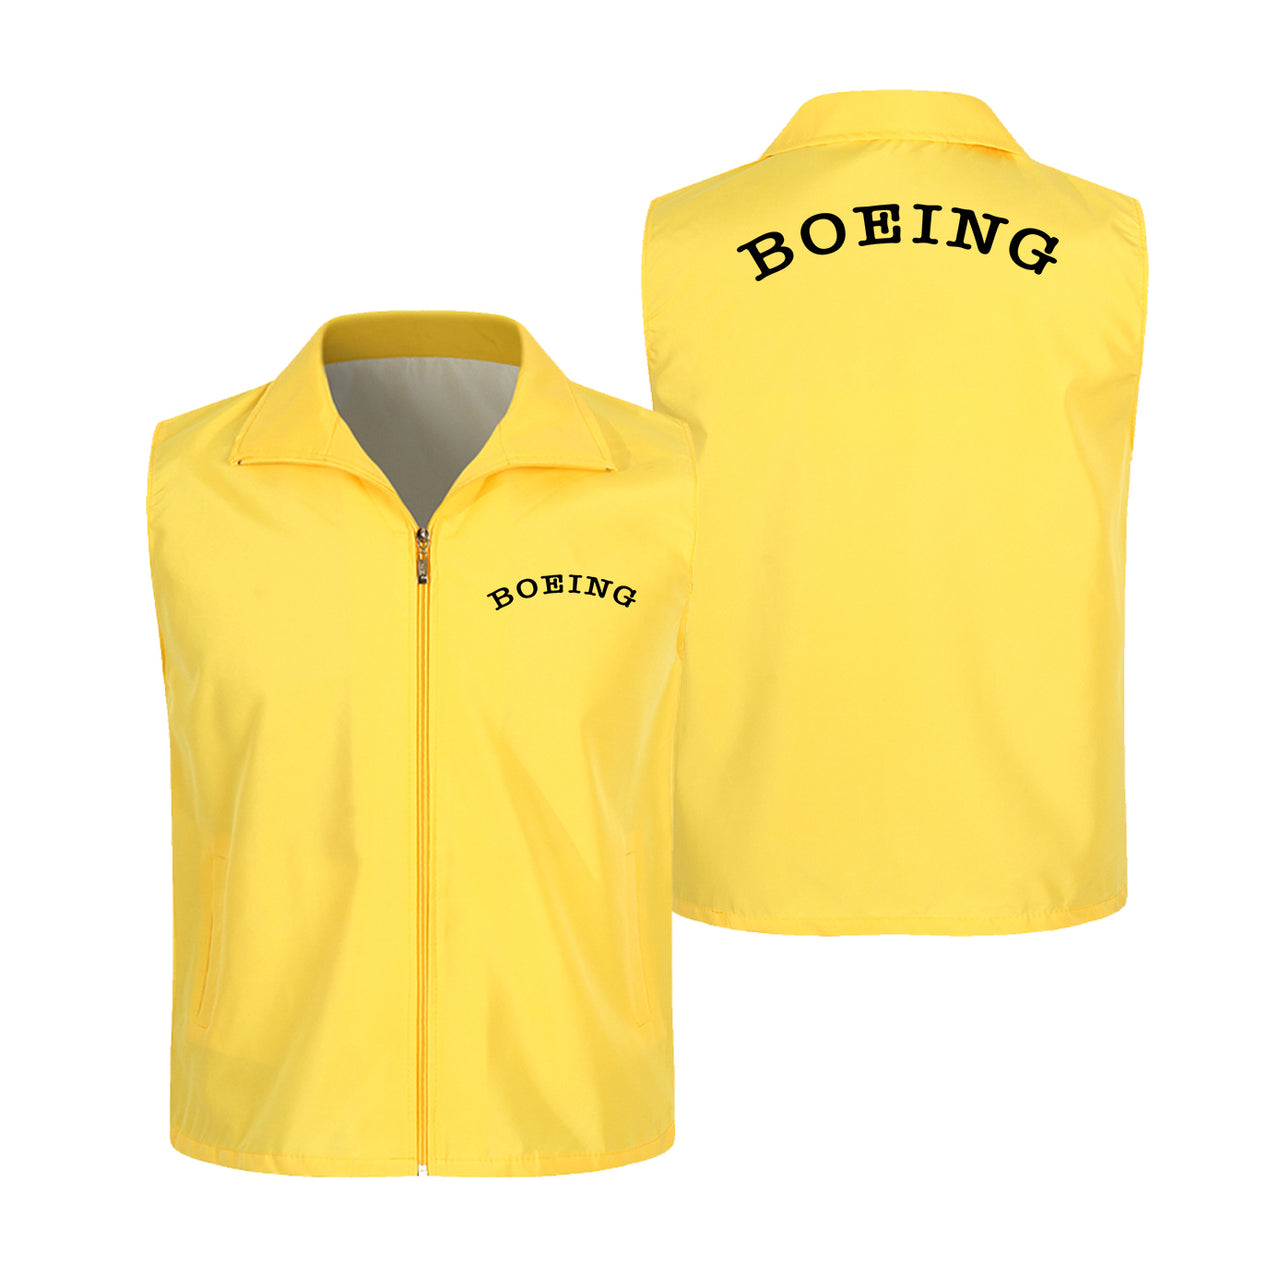 Special BOEING Text Designed Thin Style Vests